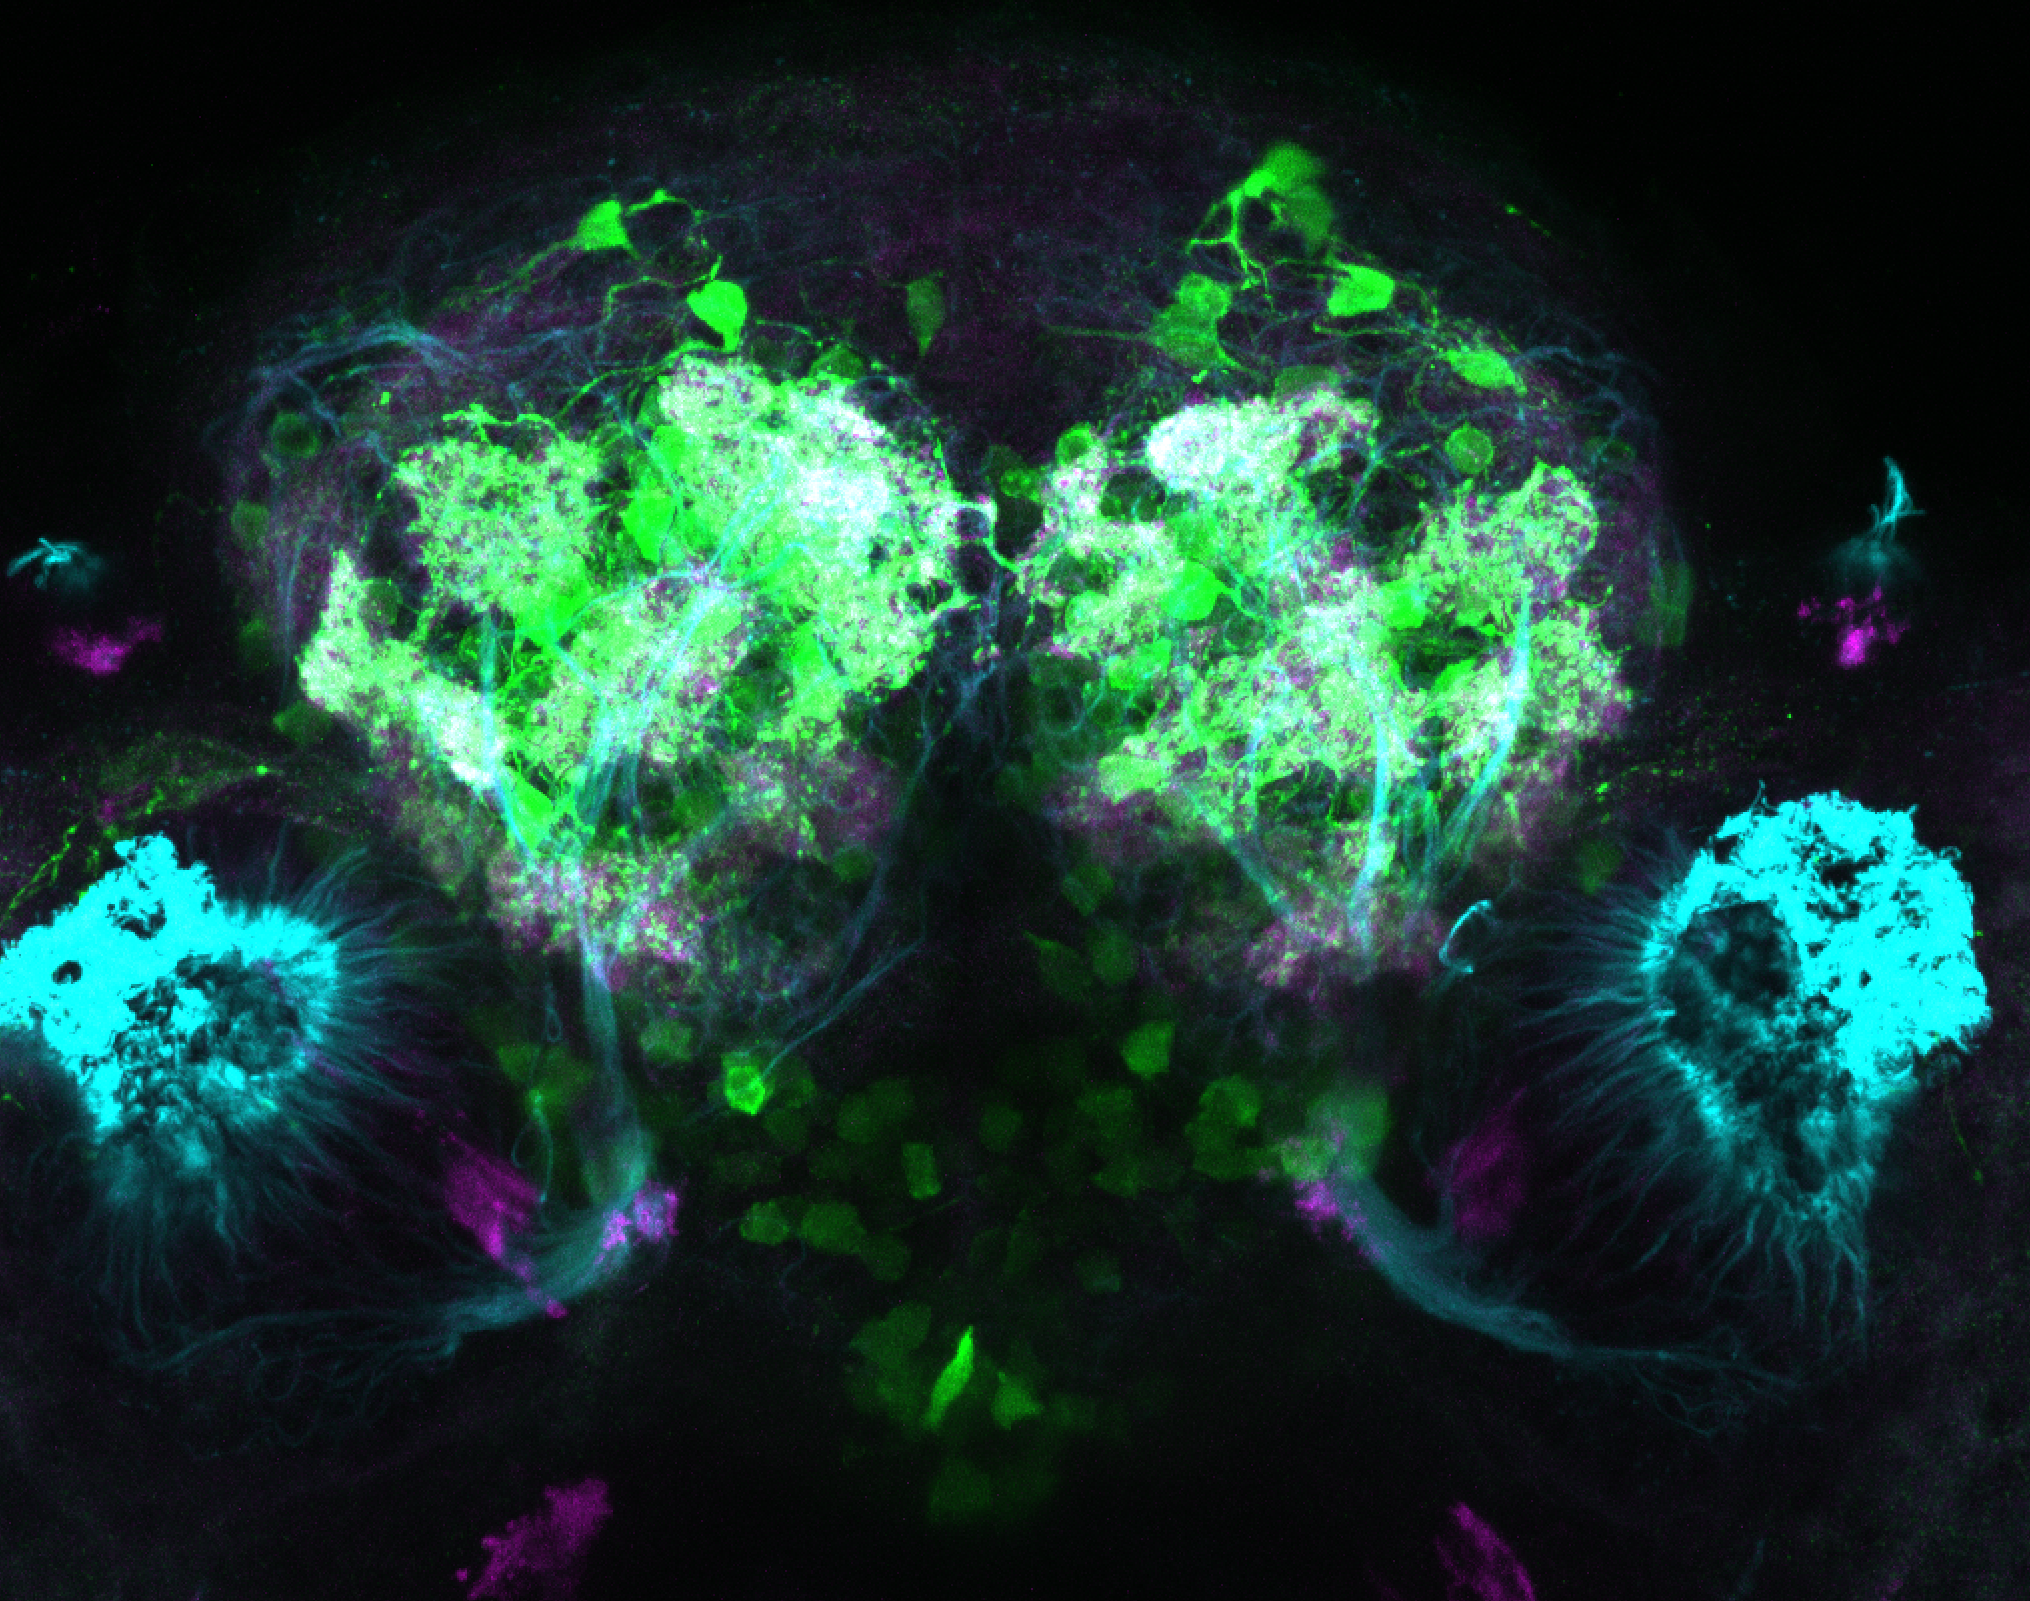 Olfactory glomeruli in Tg(1.4dlx5a-dlx6a:GFP)ot1 labelled with GFP, tubulin and sv2